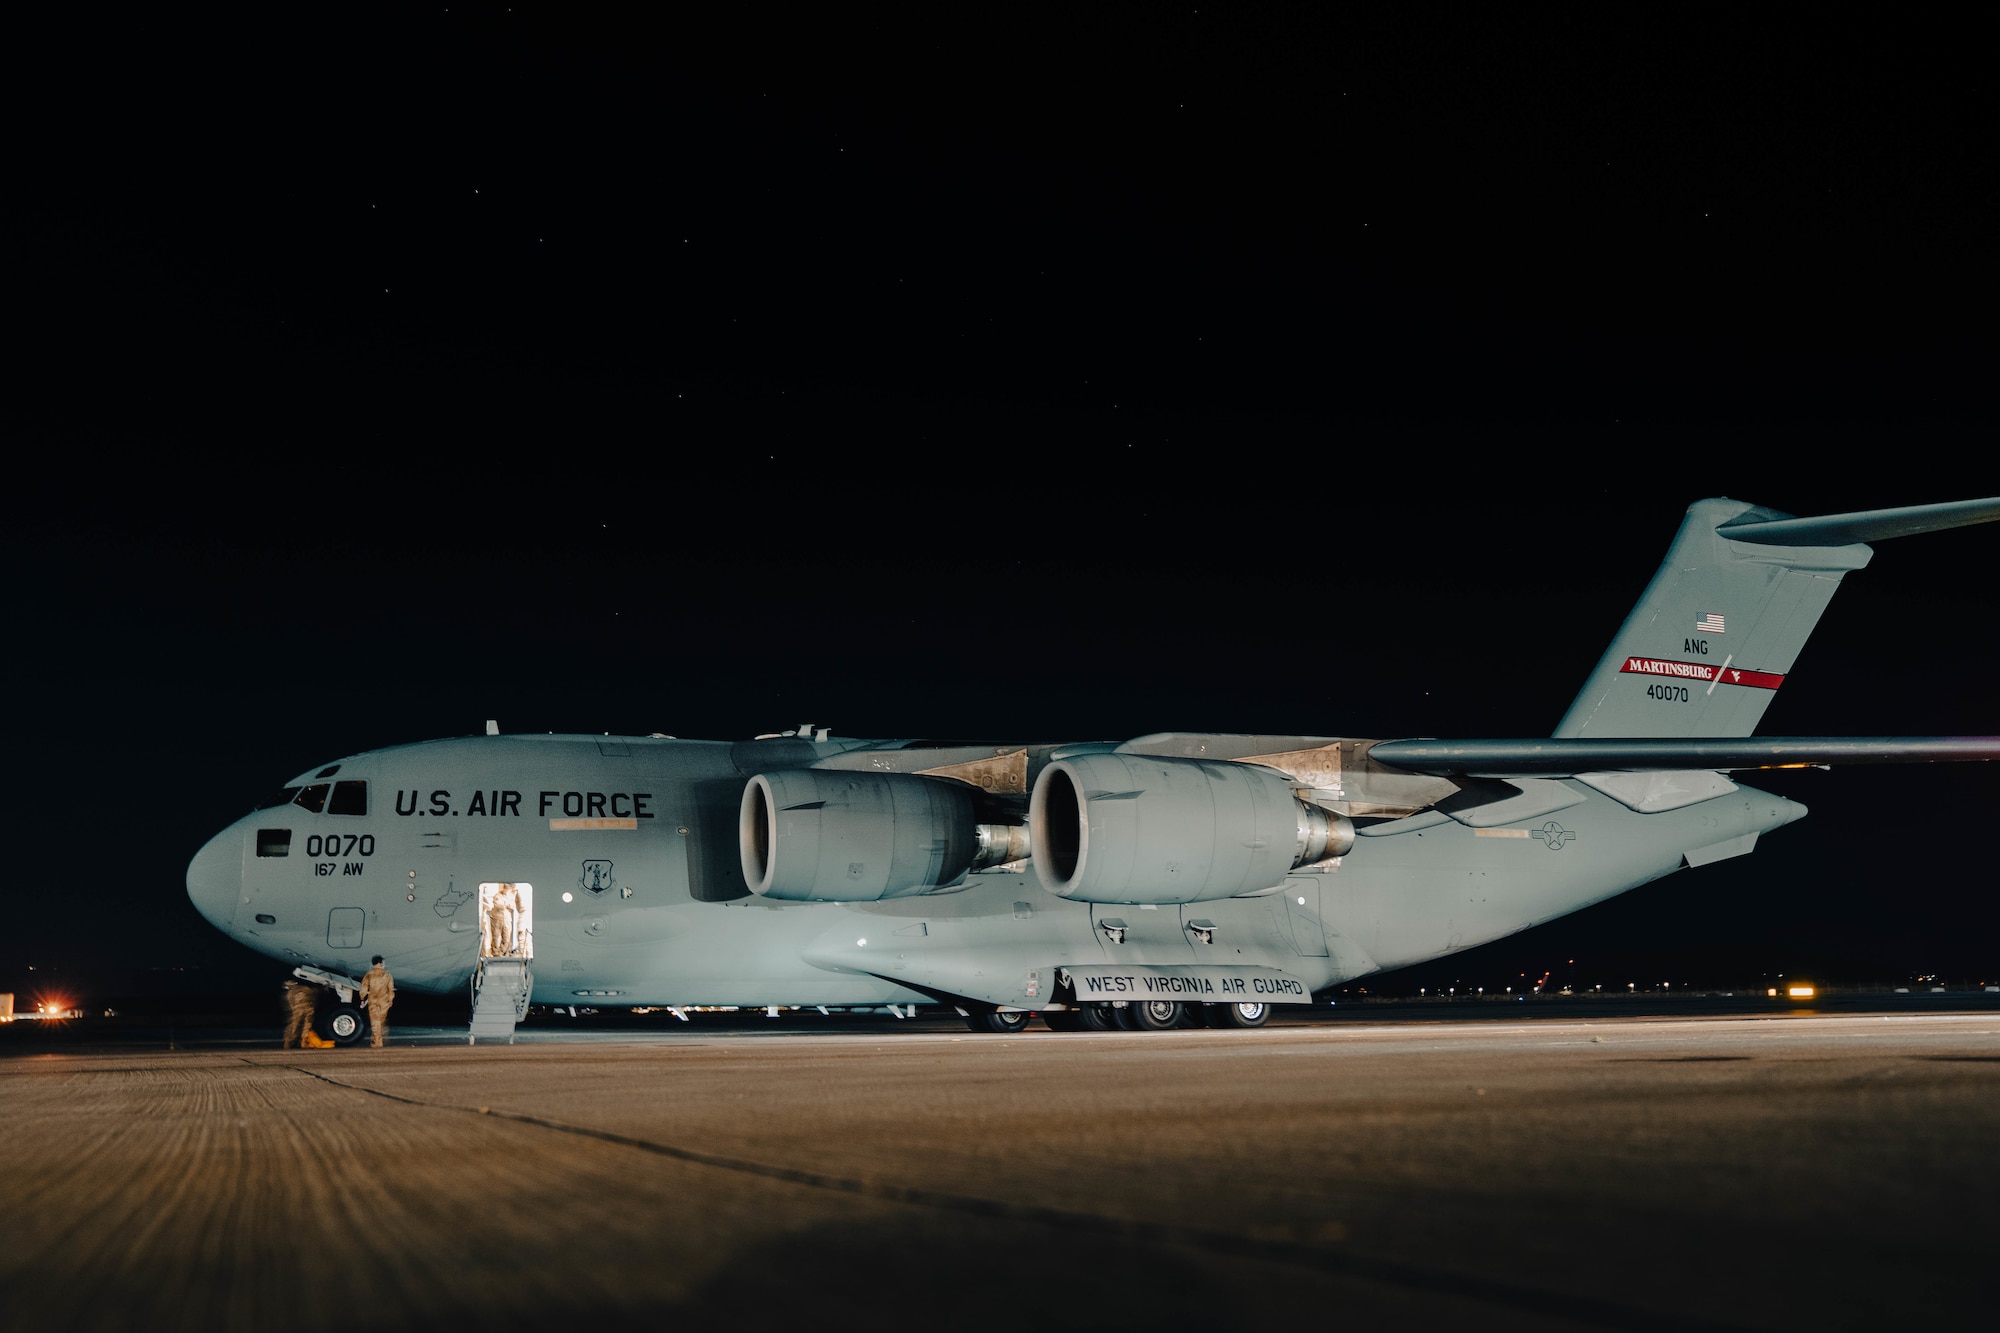 A West Virginia Air National Guard C-17 Globemaster lll carrying Afghanistan evacuees arrives at Naval Air Station Sigonella in Italy Aug. 22, 2021. Two aircrews from the 167th Airlift Wing transported passengers and cargo into and out of Hamid Karzai International Airport in Kabul.